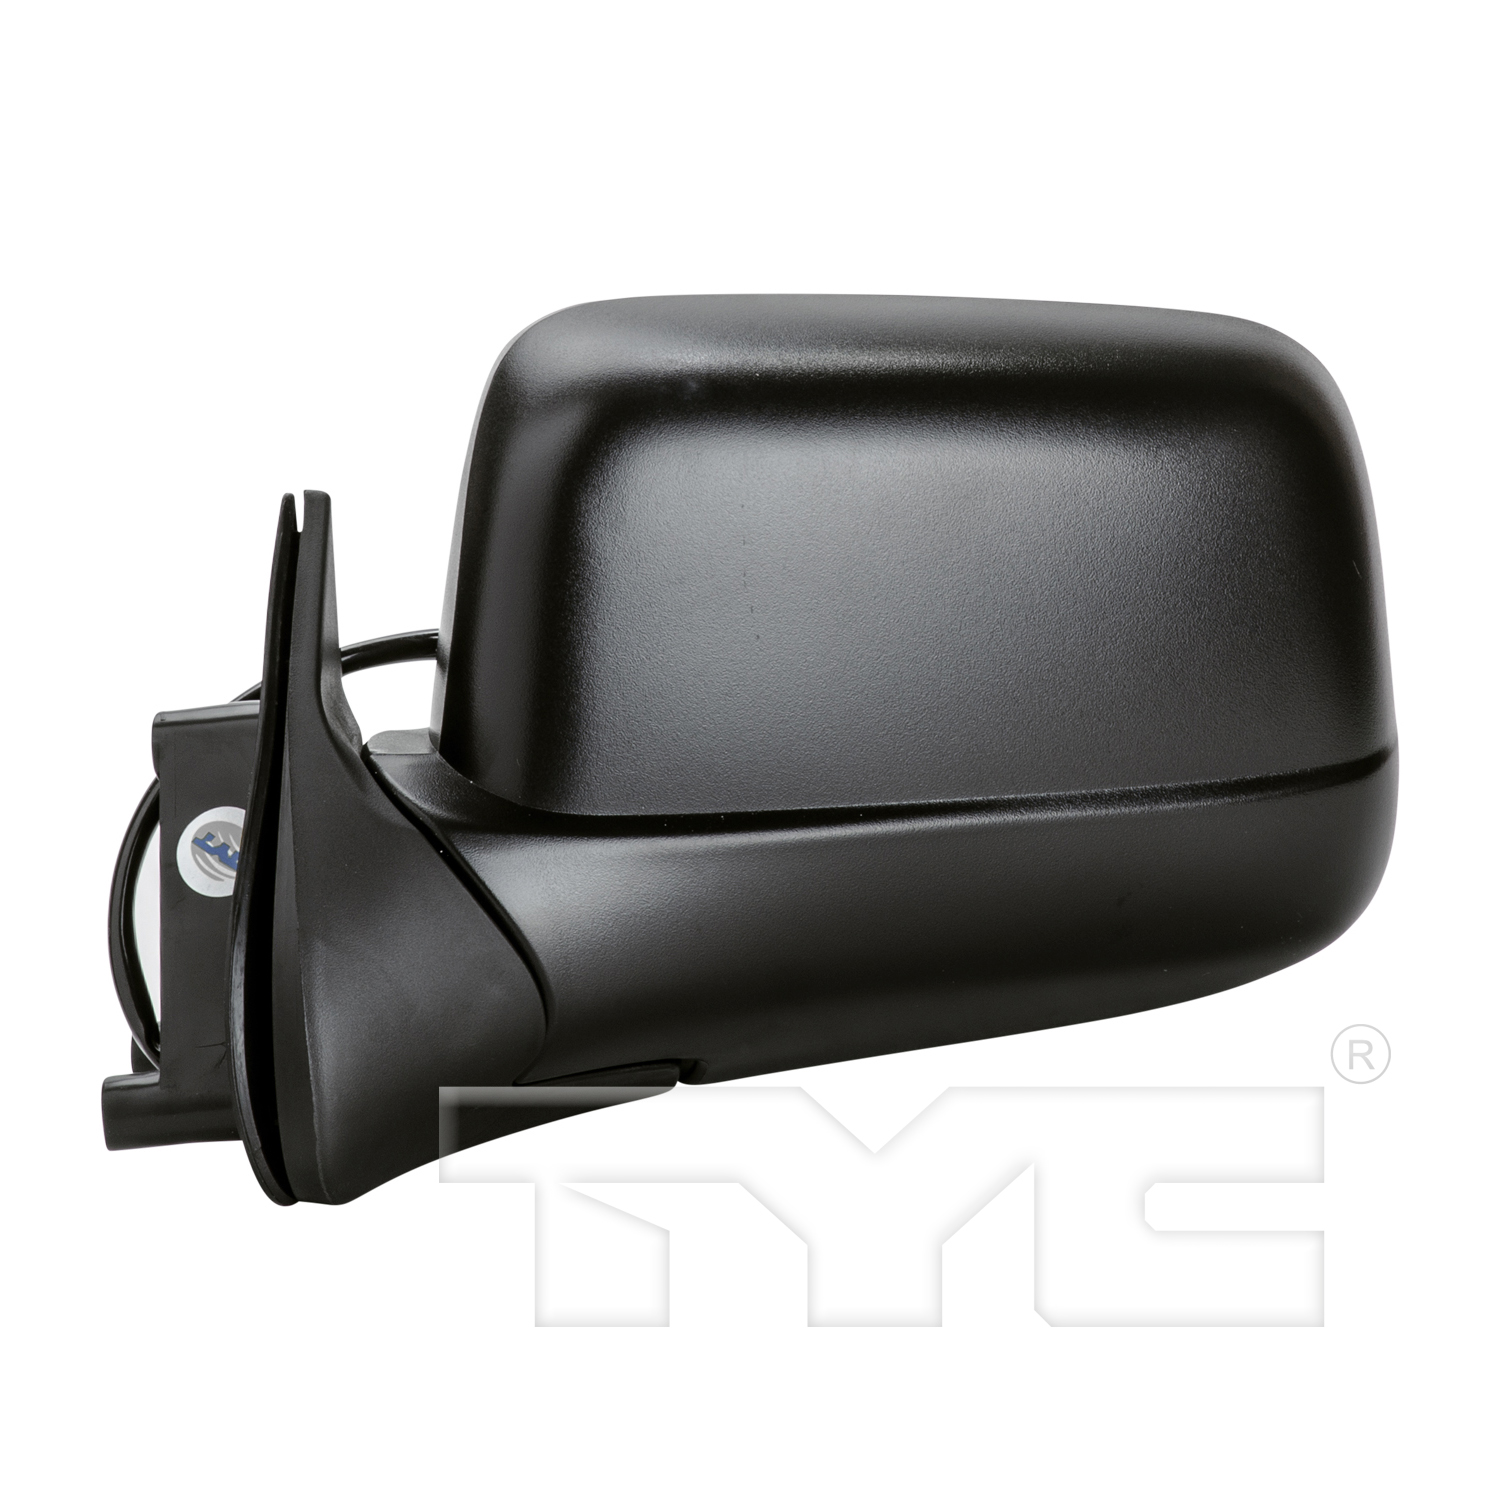 Aftermarket MIRRORS for NISSAN - FRONTIER, FRONTIER,01-04,LT Mirror outside rear view